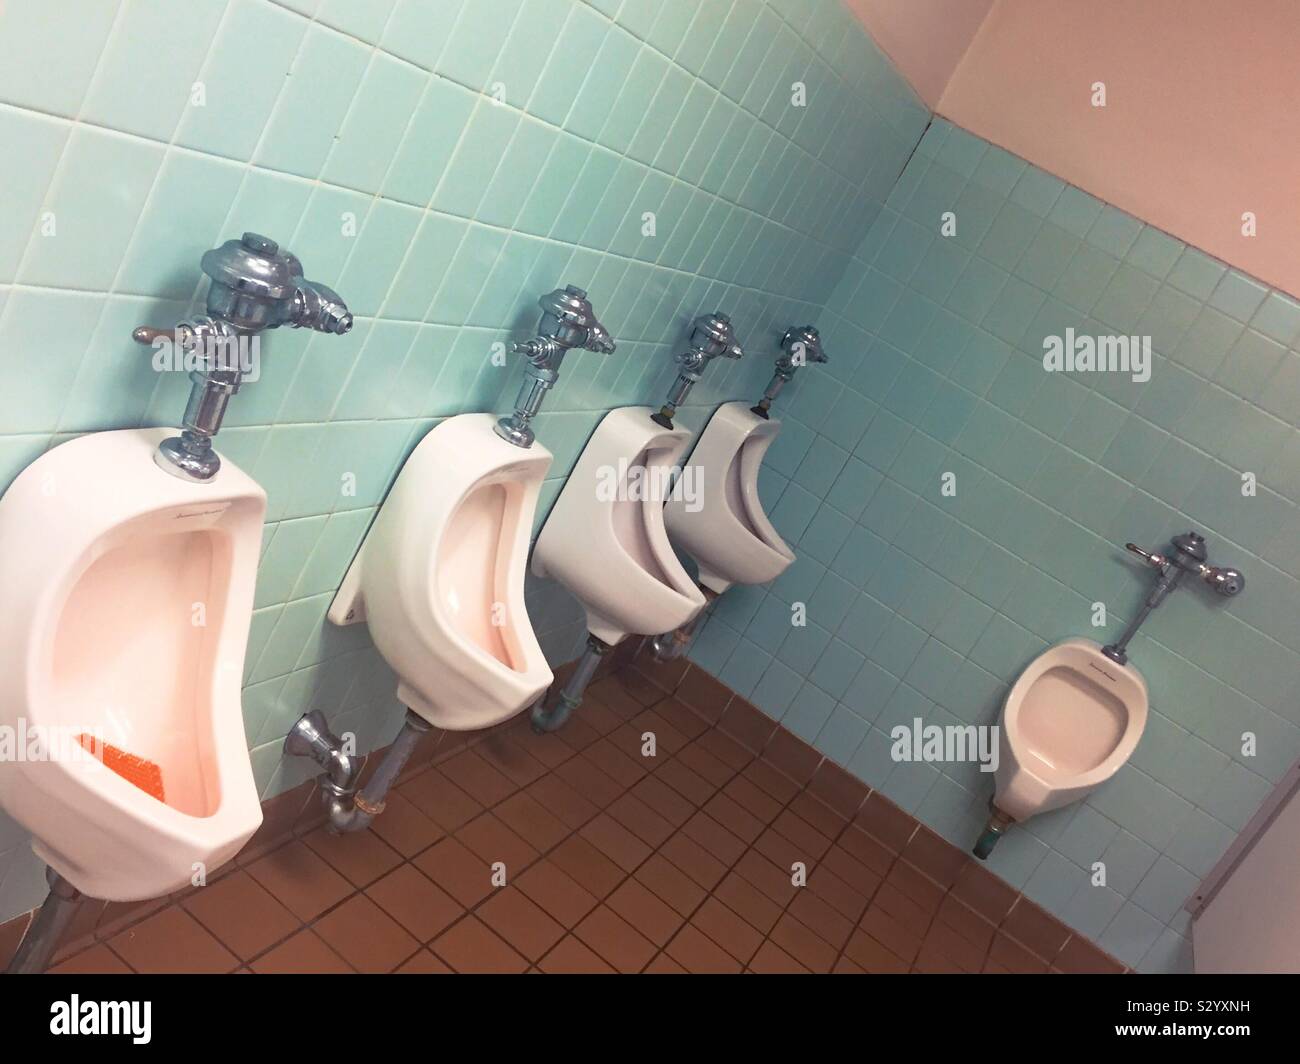 Five urinals in a tiled public men’s room, USA Stock Photo